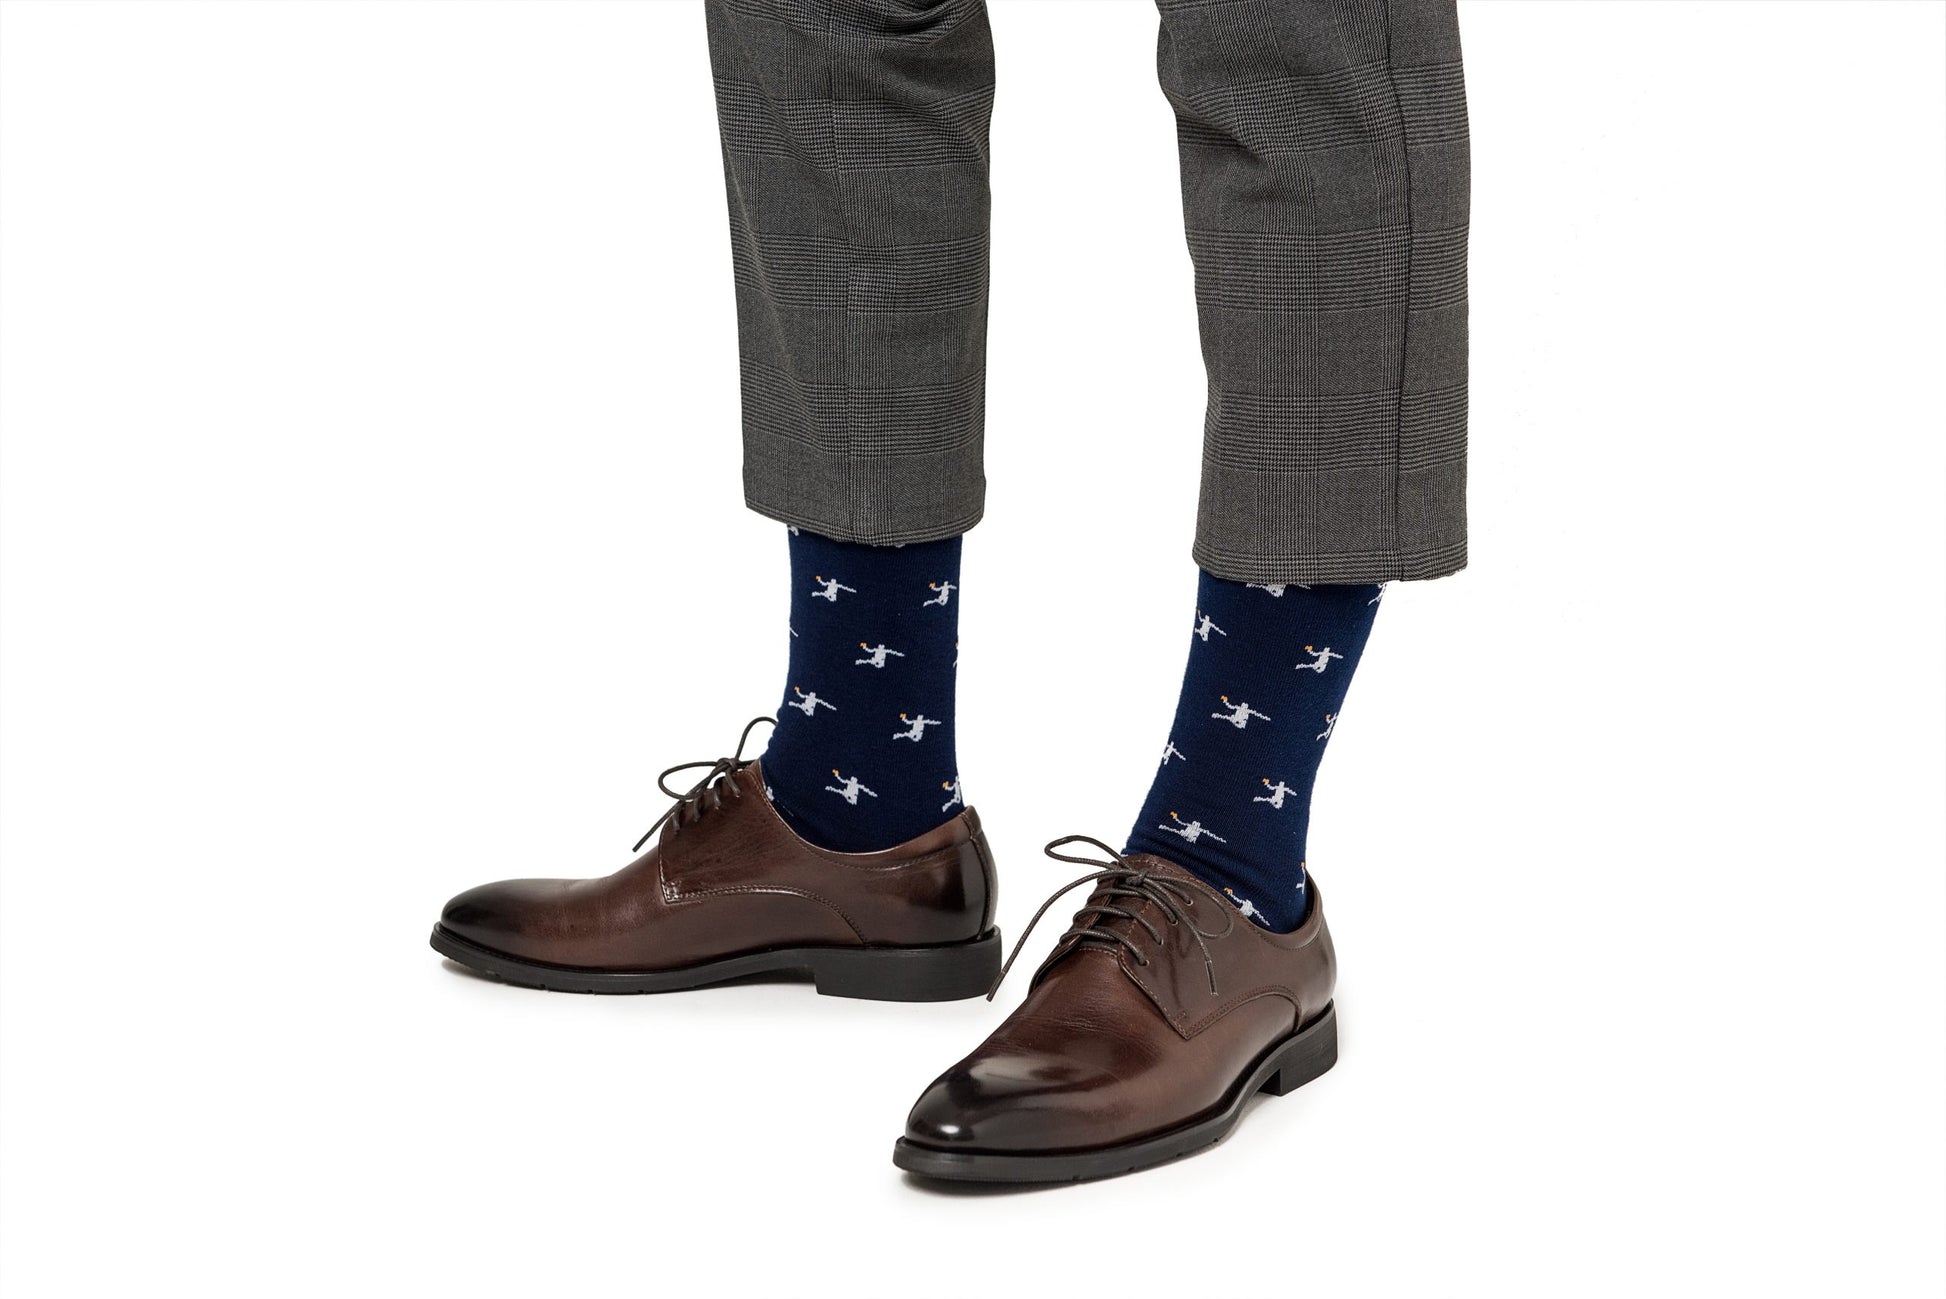 A man wearing a pair of Basketball Dunk Socks with stars on them.